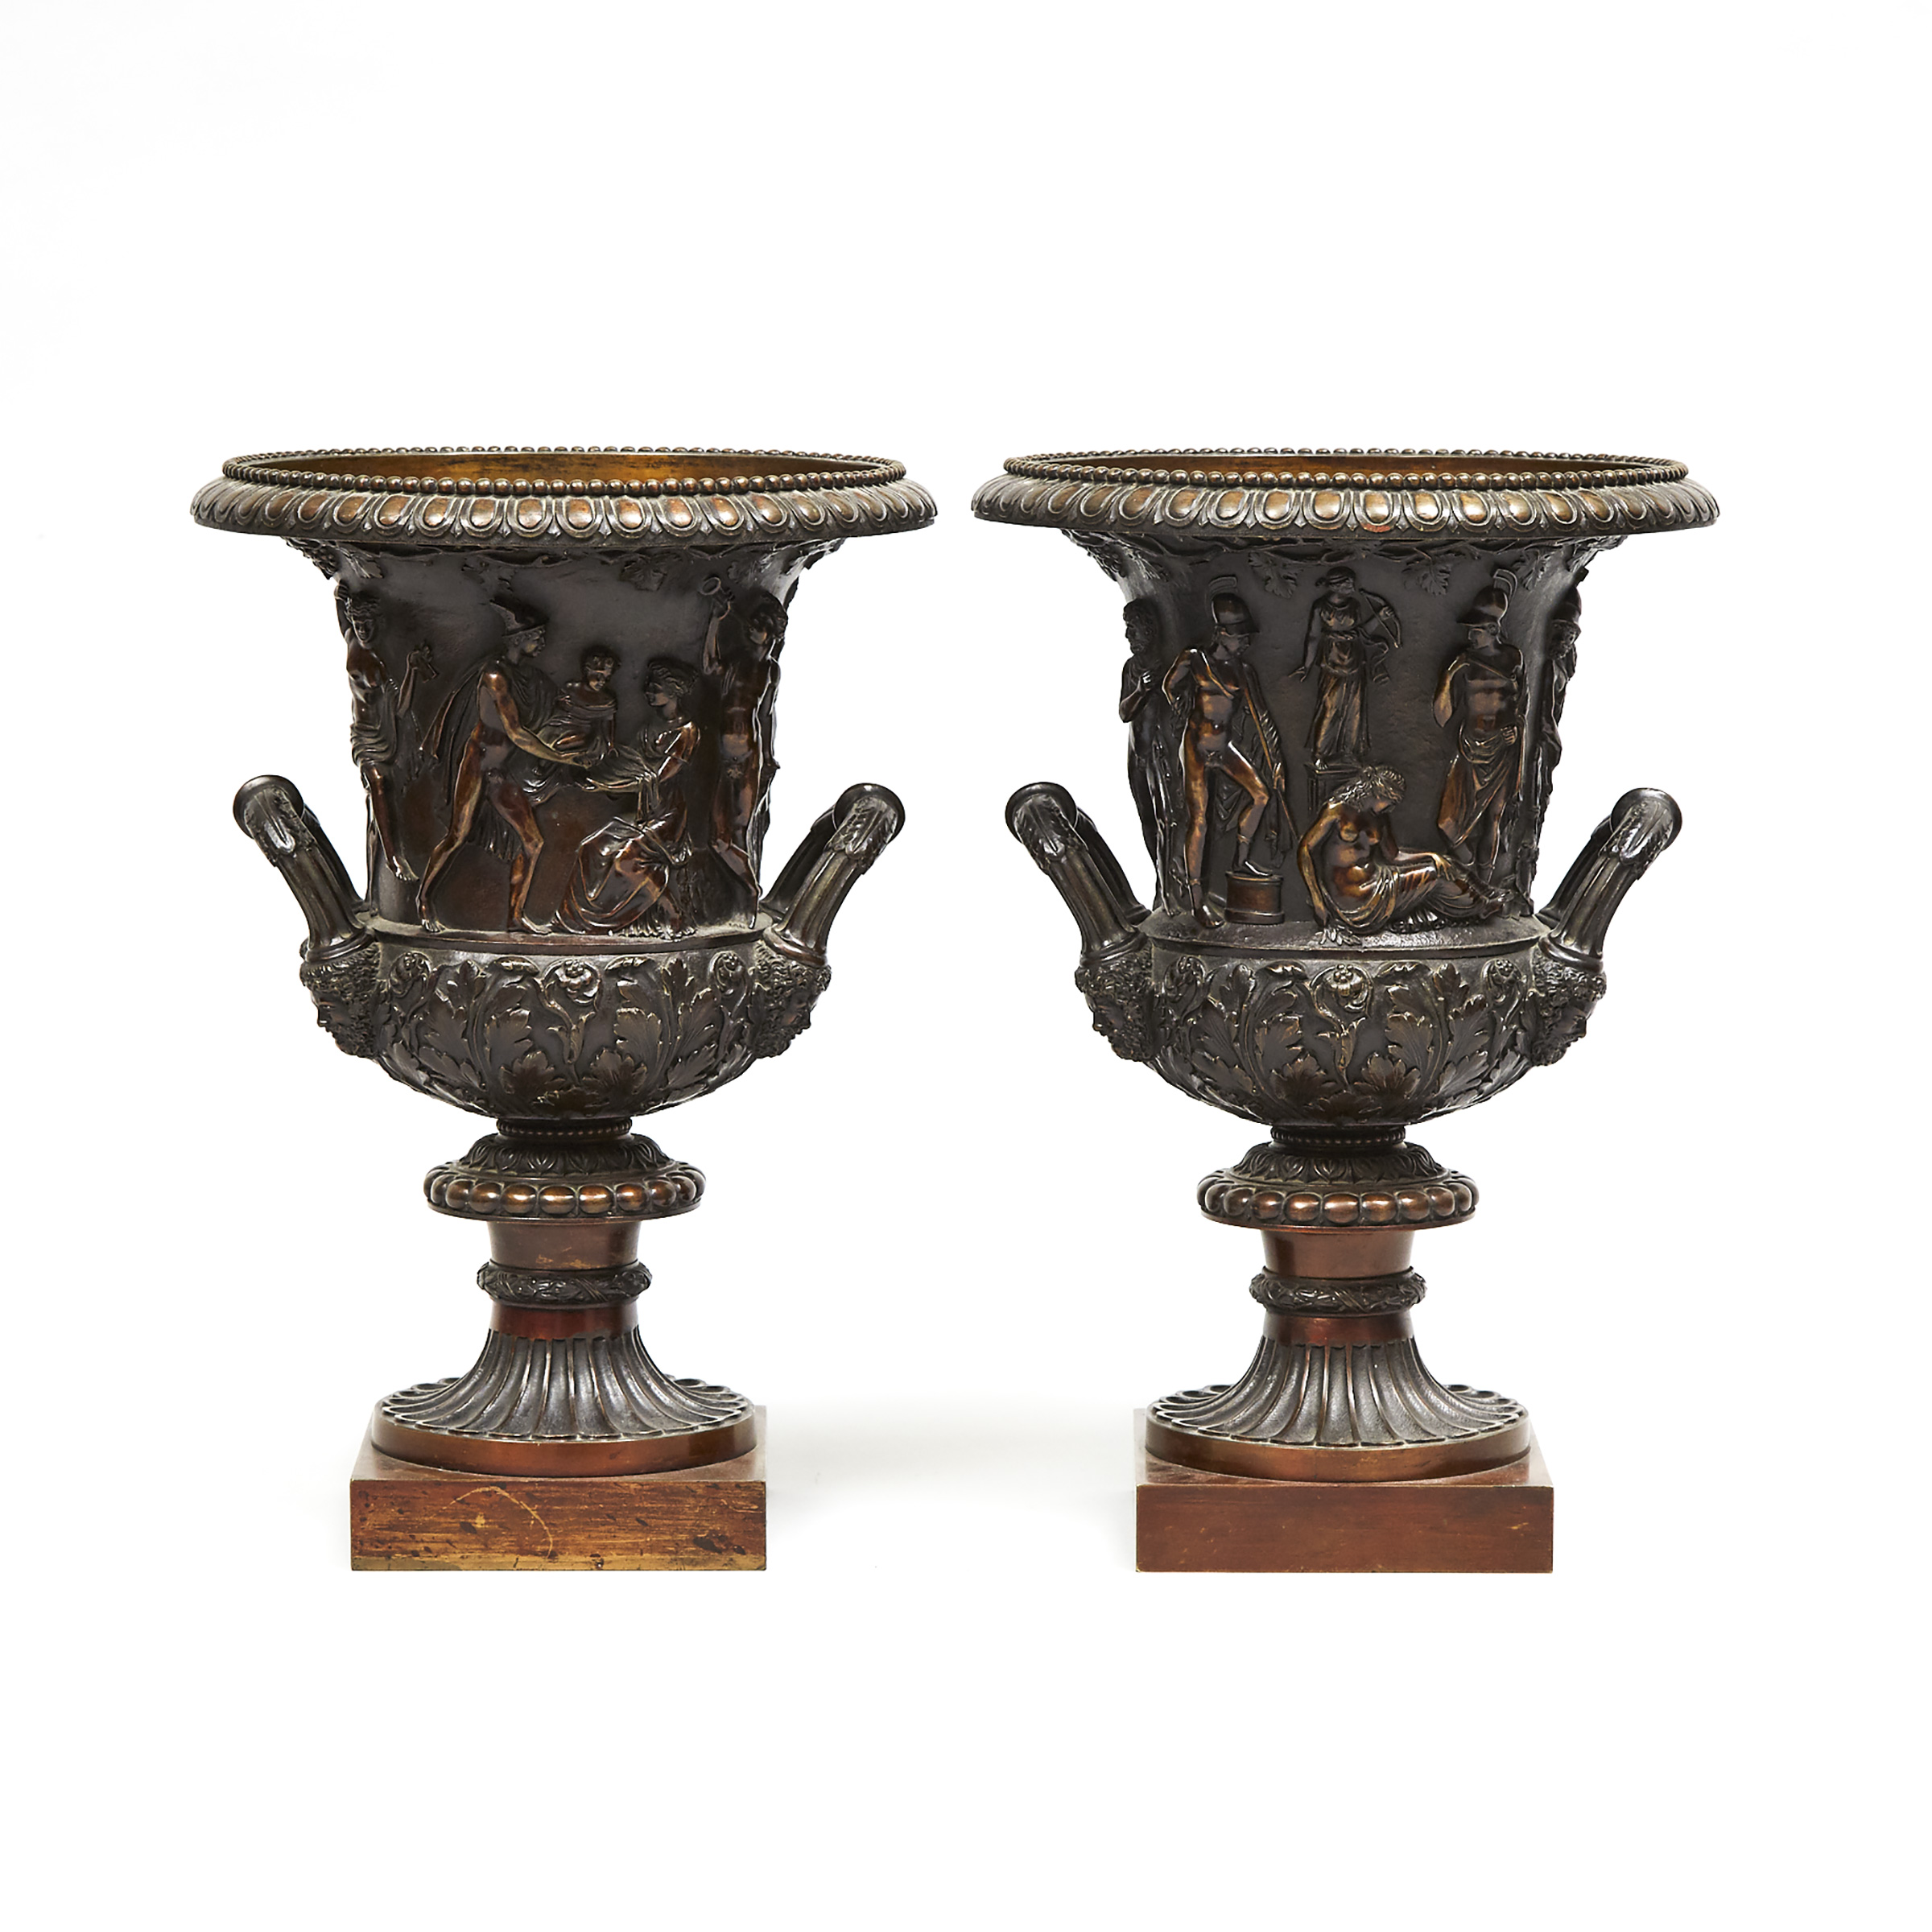 Pair of Italian Bronze Models of the Medici and Borghese Campana Vases, c.1900